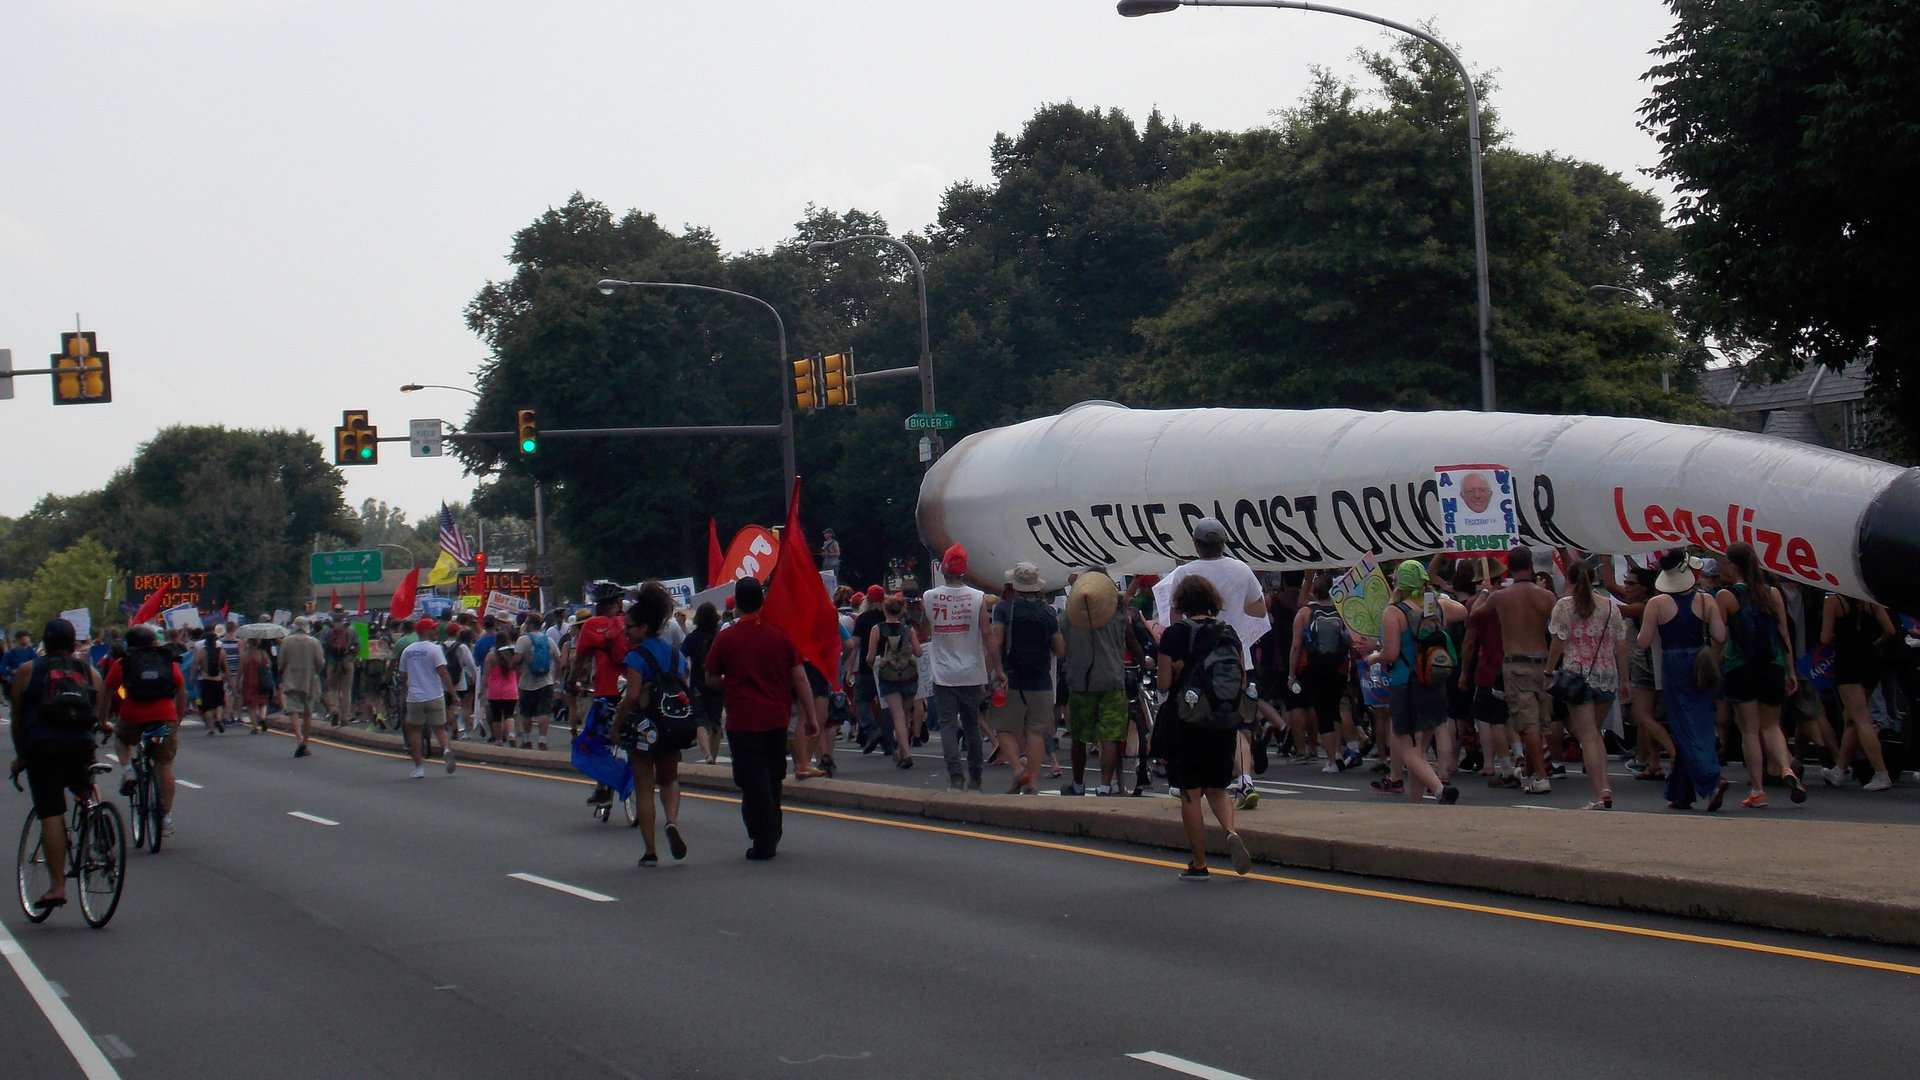 Philadelphia, PA, USA - July 25, 2016: Protesters march down Broad Street carrying an inflatable marijuana cigarette during the Democratic National Convention.